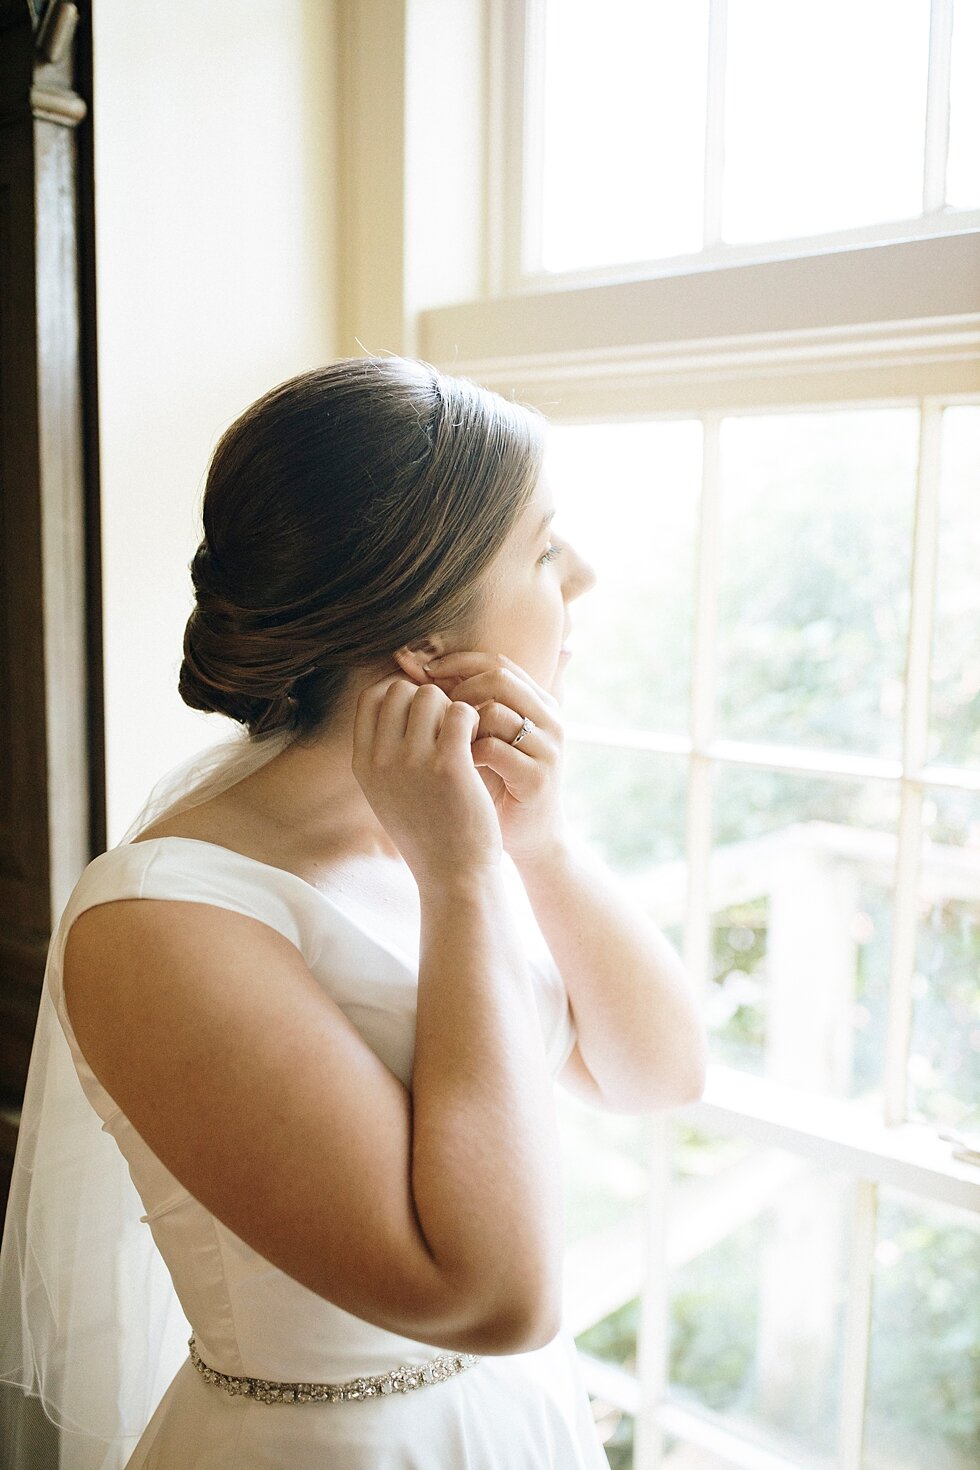  bride getting ready and putting on earrings facing out window  #thatsdarling #weddingday #weddinginspiration #weddingphoto #love #justmarried #midwestphotographer #kywedding #louisville #kentuckywedding #louisvillekyweddingphotographer #weddingbliss